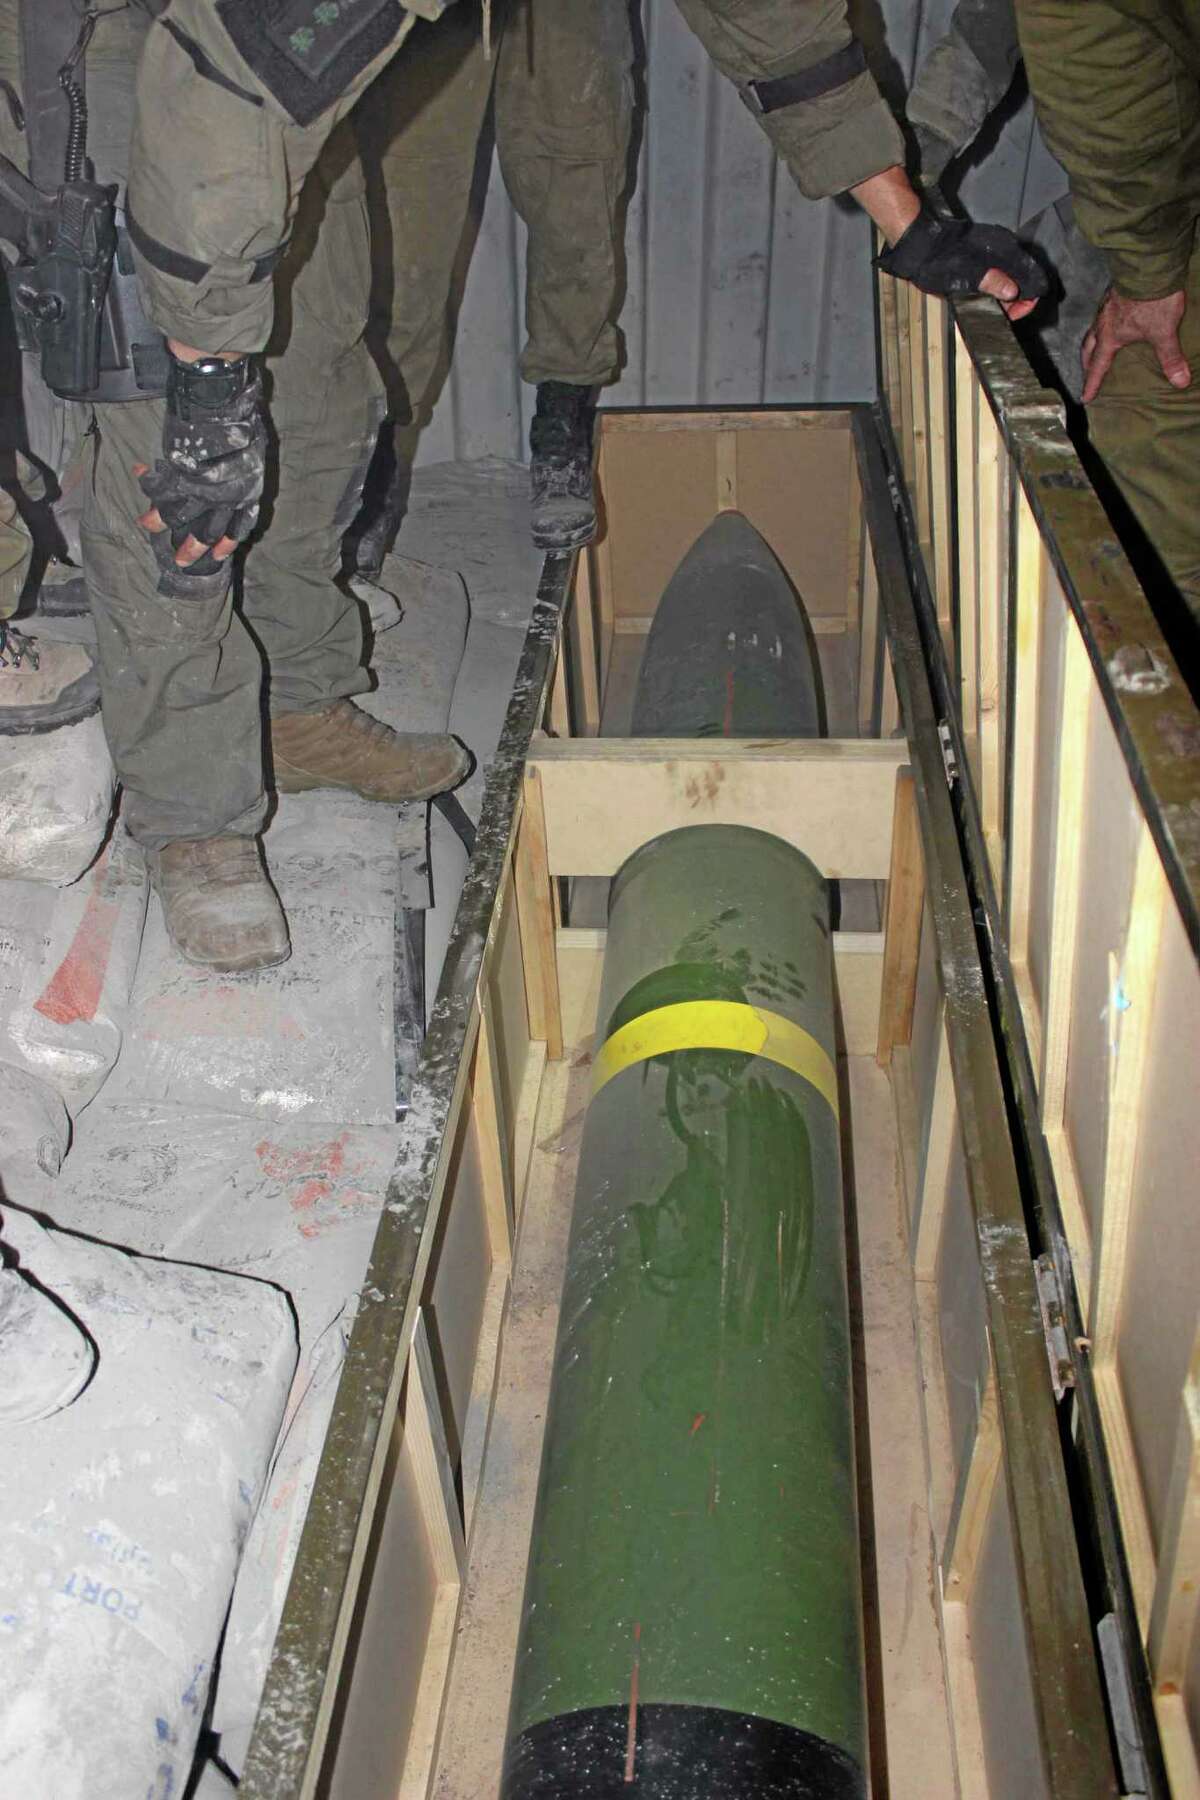 This photo released by the Israel Defense Forces shows a missile on an intercepted ship in the Red Sea Wednesday, March 5, 2014. Israeli naval forces raided a ship deep in the Red Sea early Wednesday and seized dozens of advanced rockets from Iran destined for Palestinian militants in Gaza, the military said. (AP Photo/IDF)